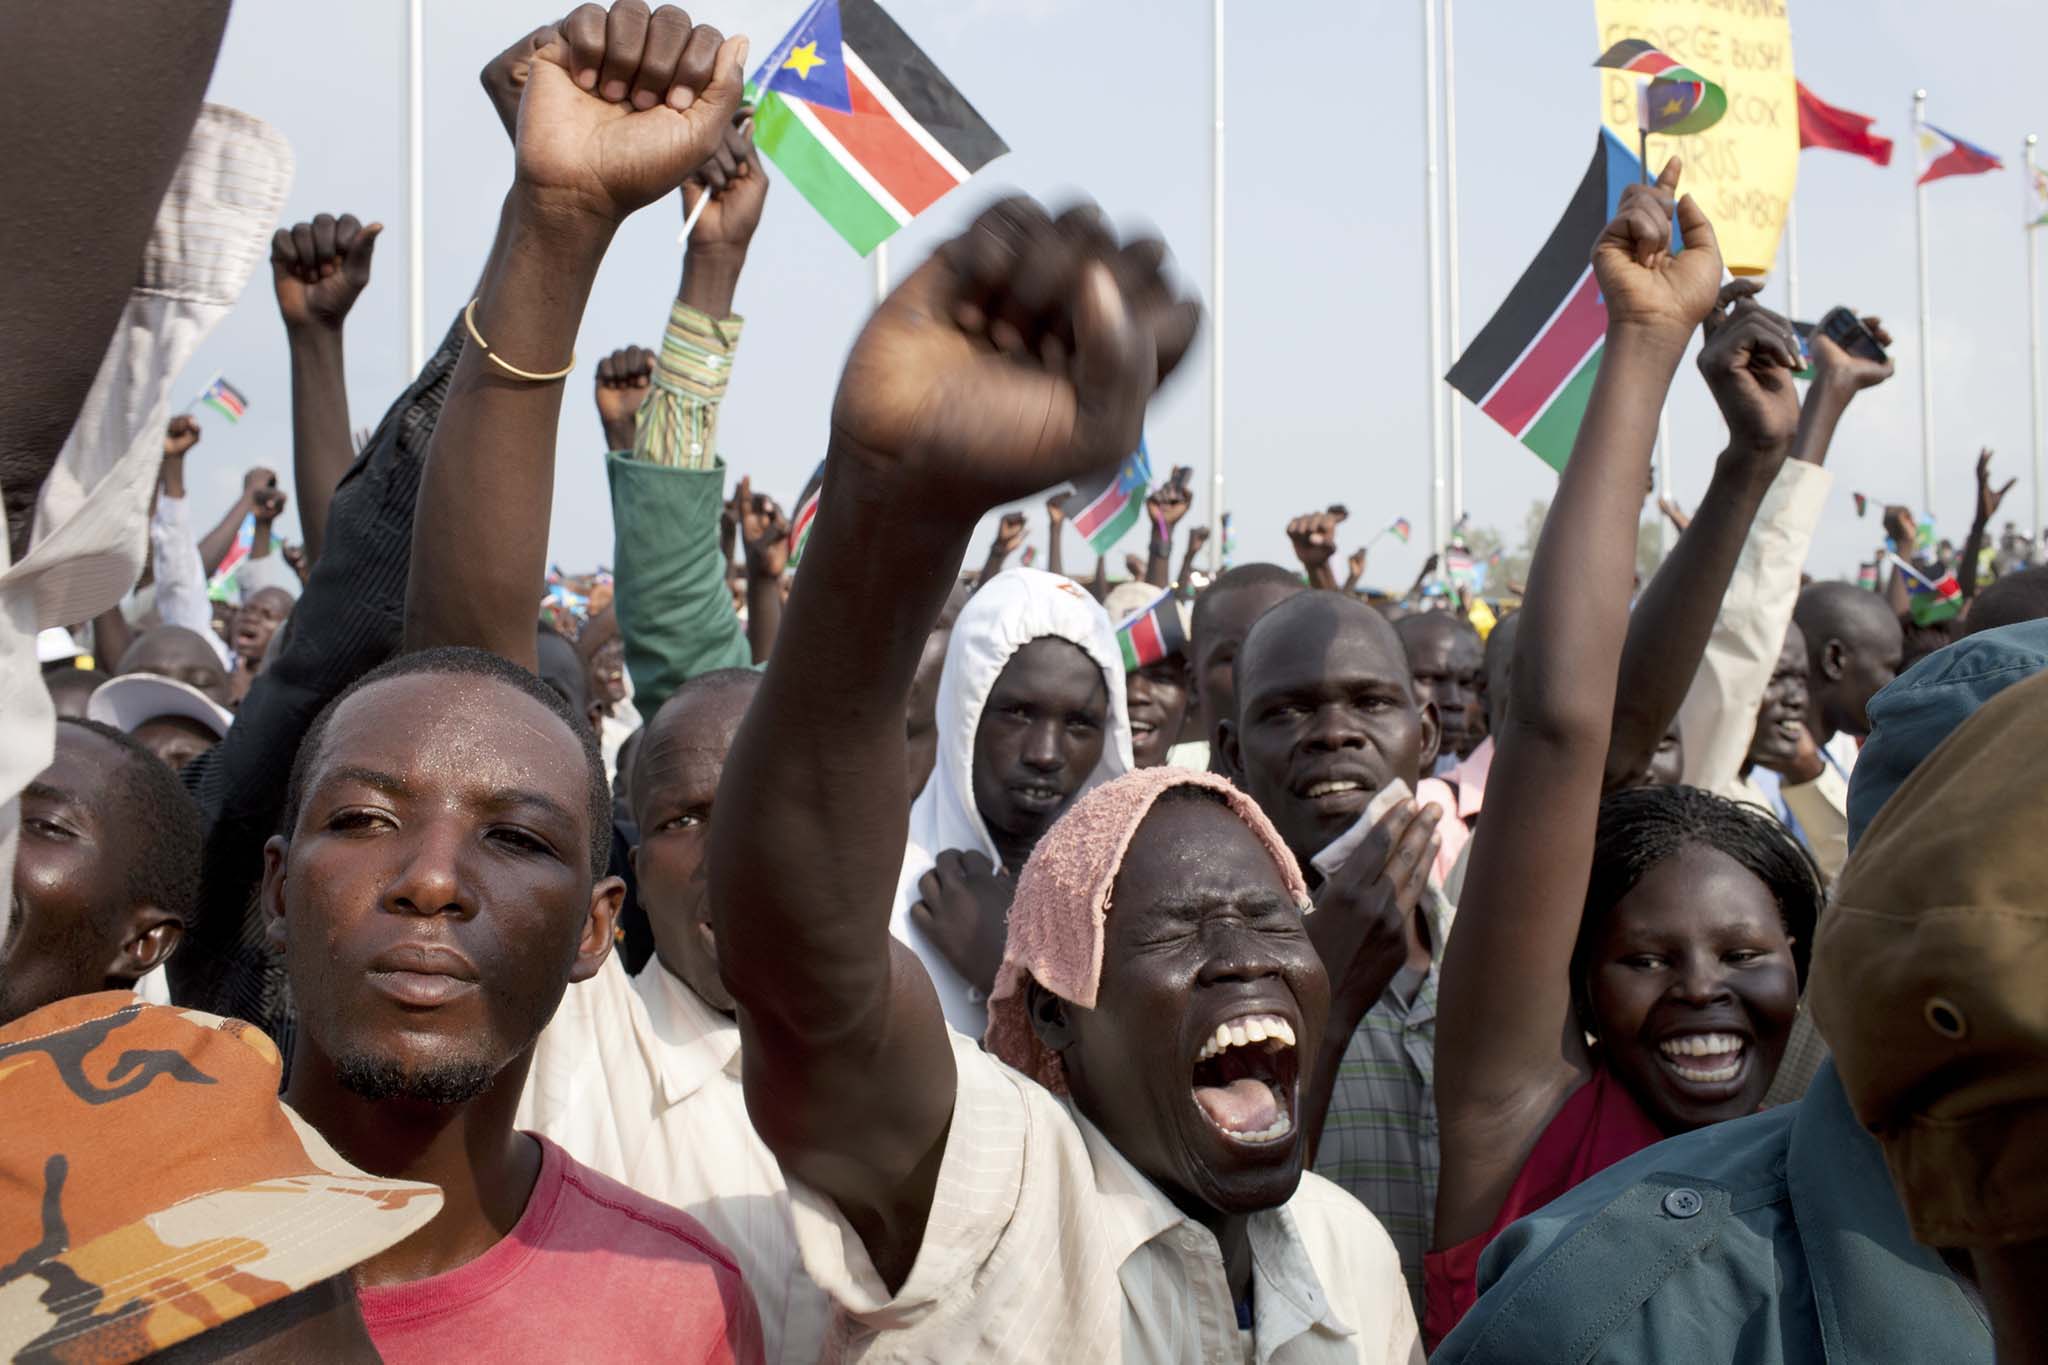 South Sudanese cheer and wave flags as they celebrate their nation's independence in Juba, South Sudan, July 9, 2011. (Tyler Hicks/The New York Times)